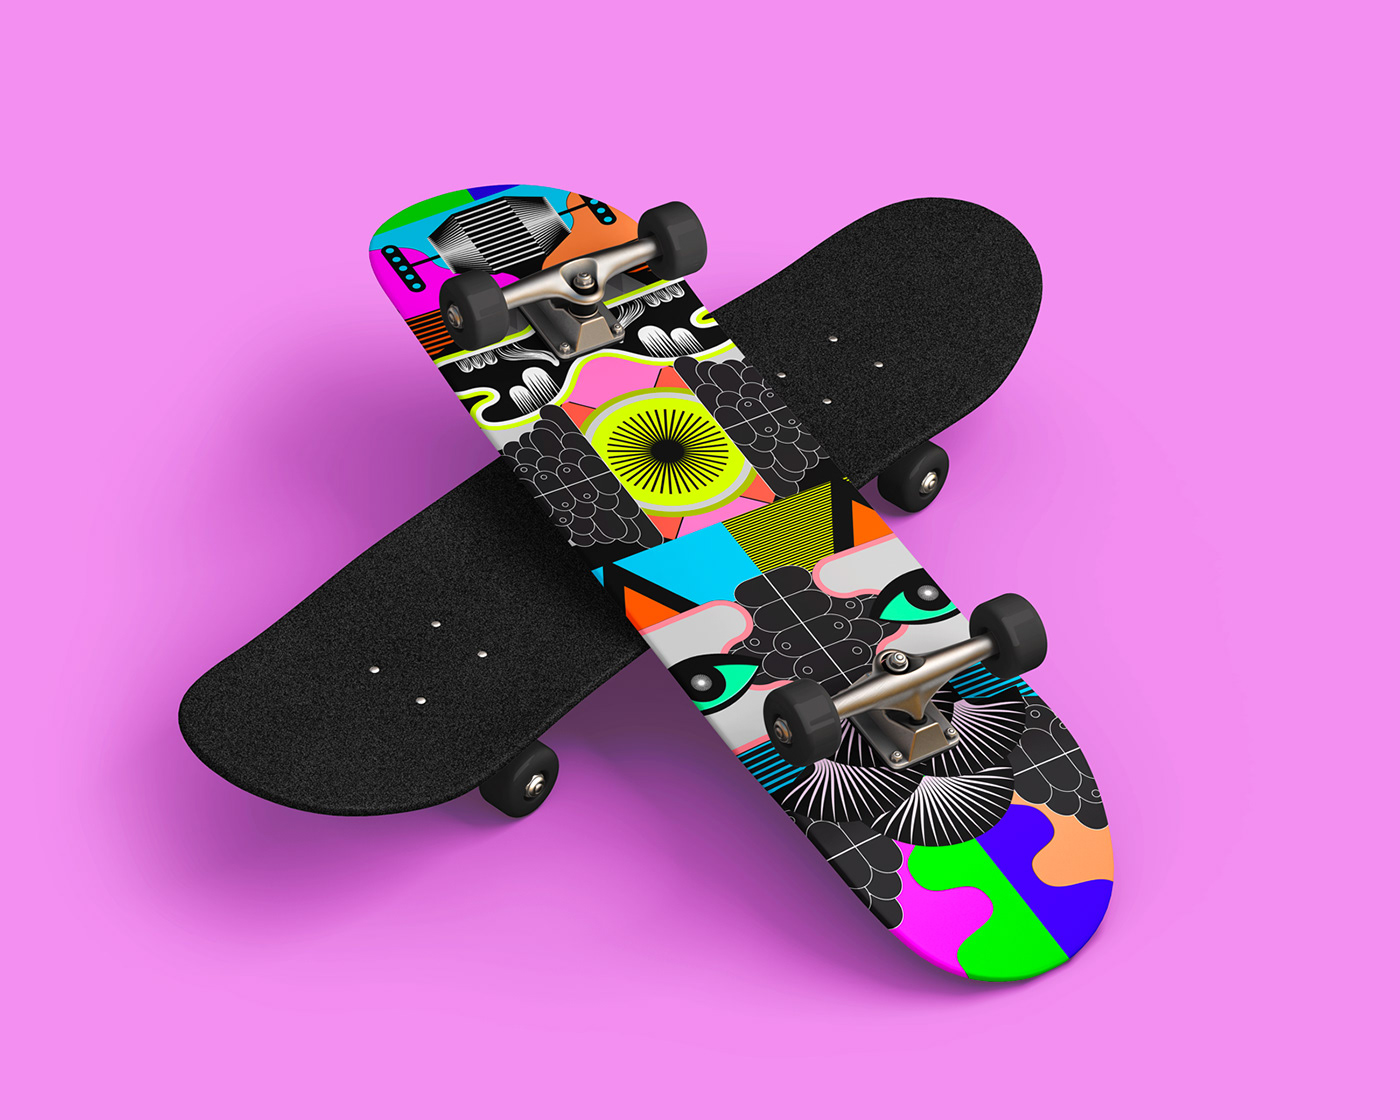 Skateboard designed with a motif and illustration composed and created by graphic designers